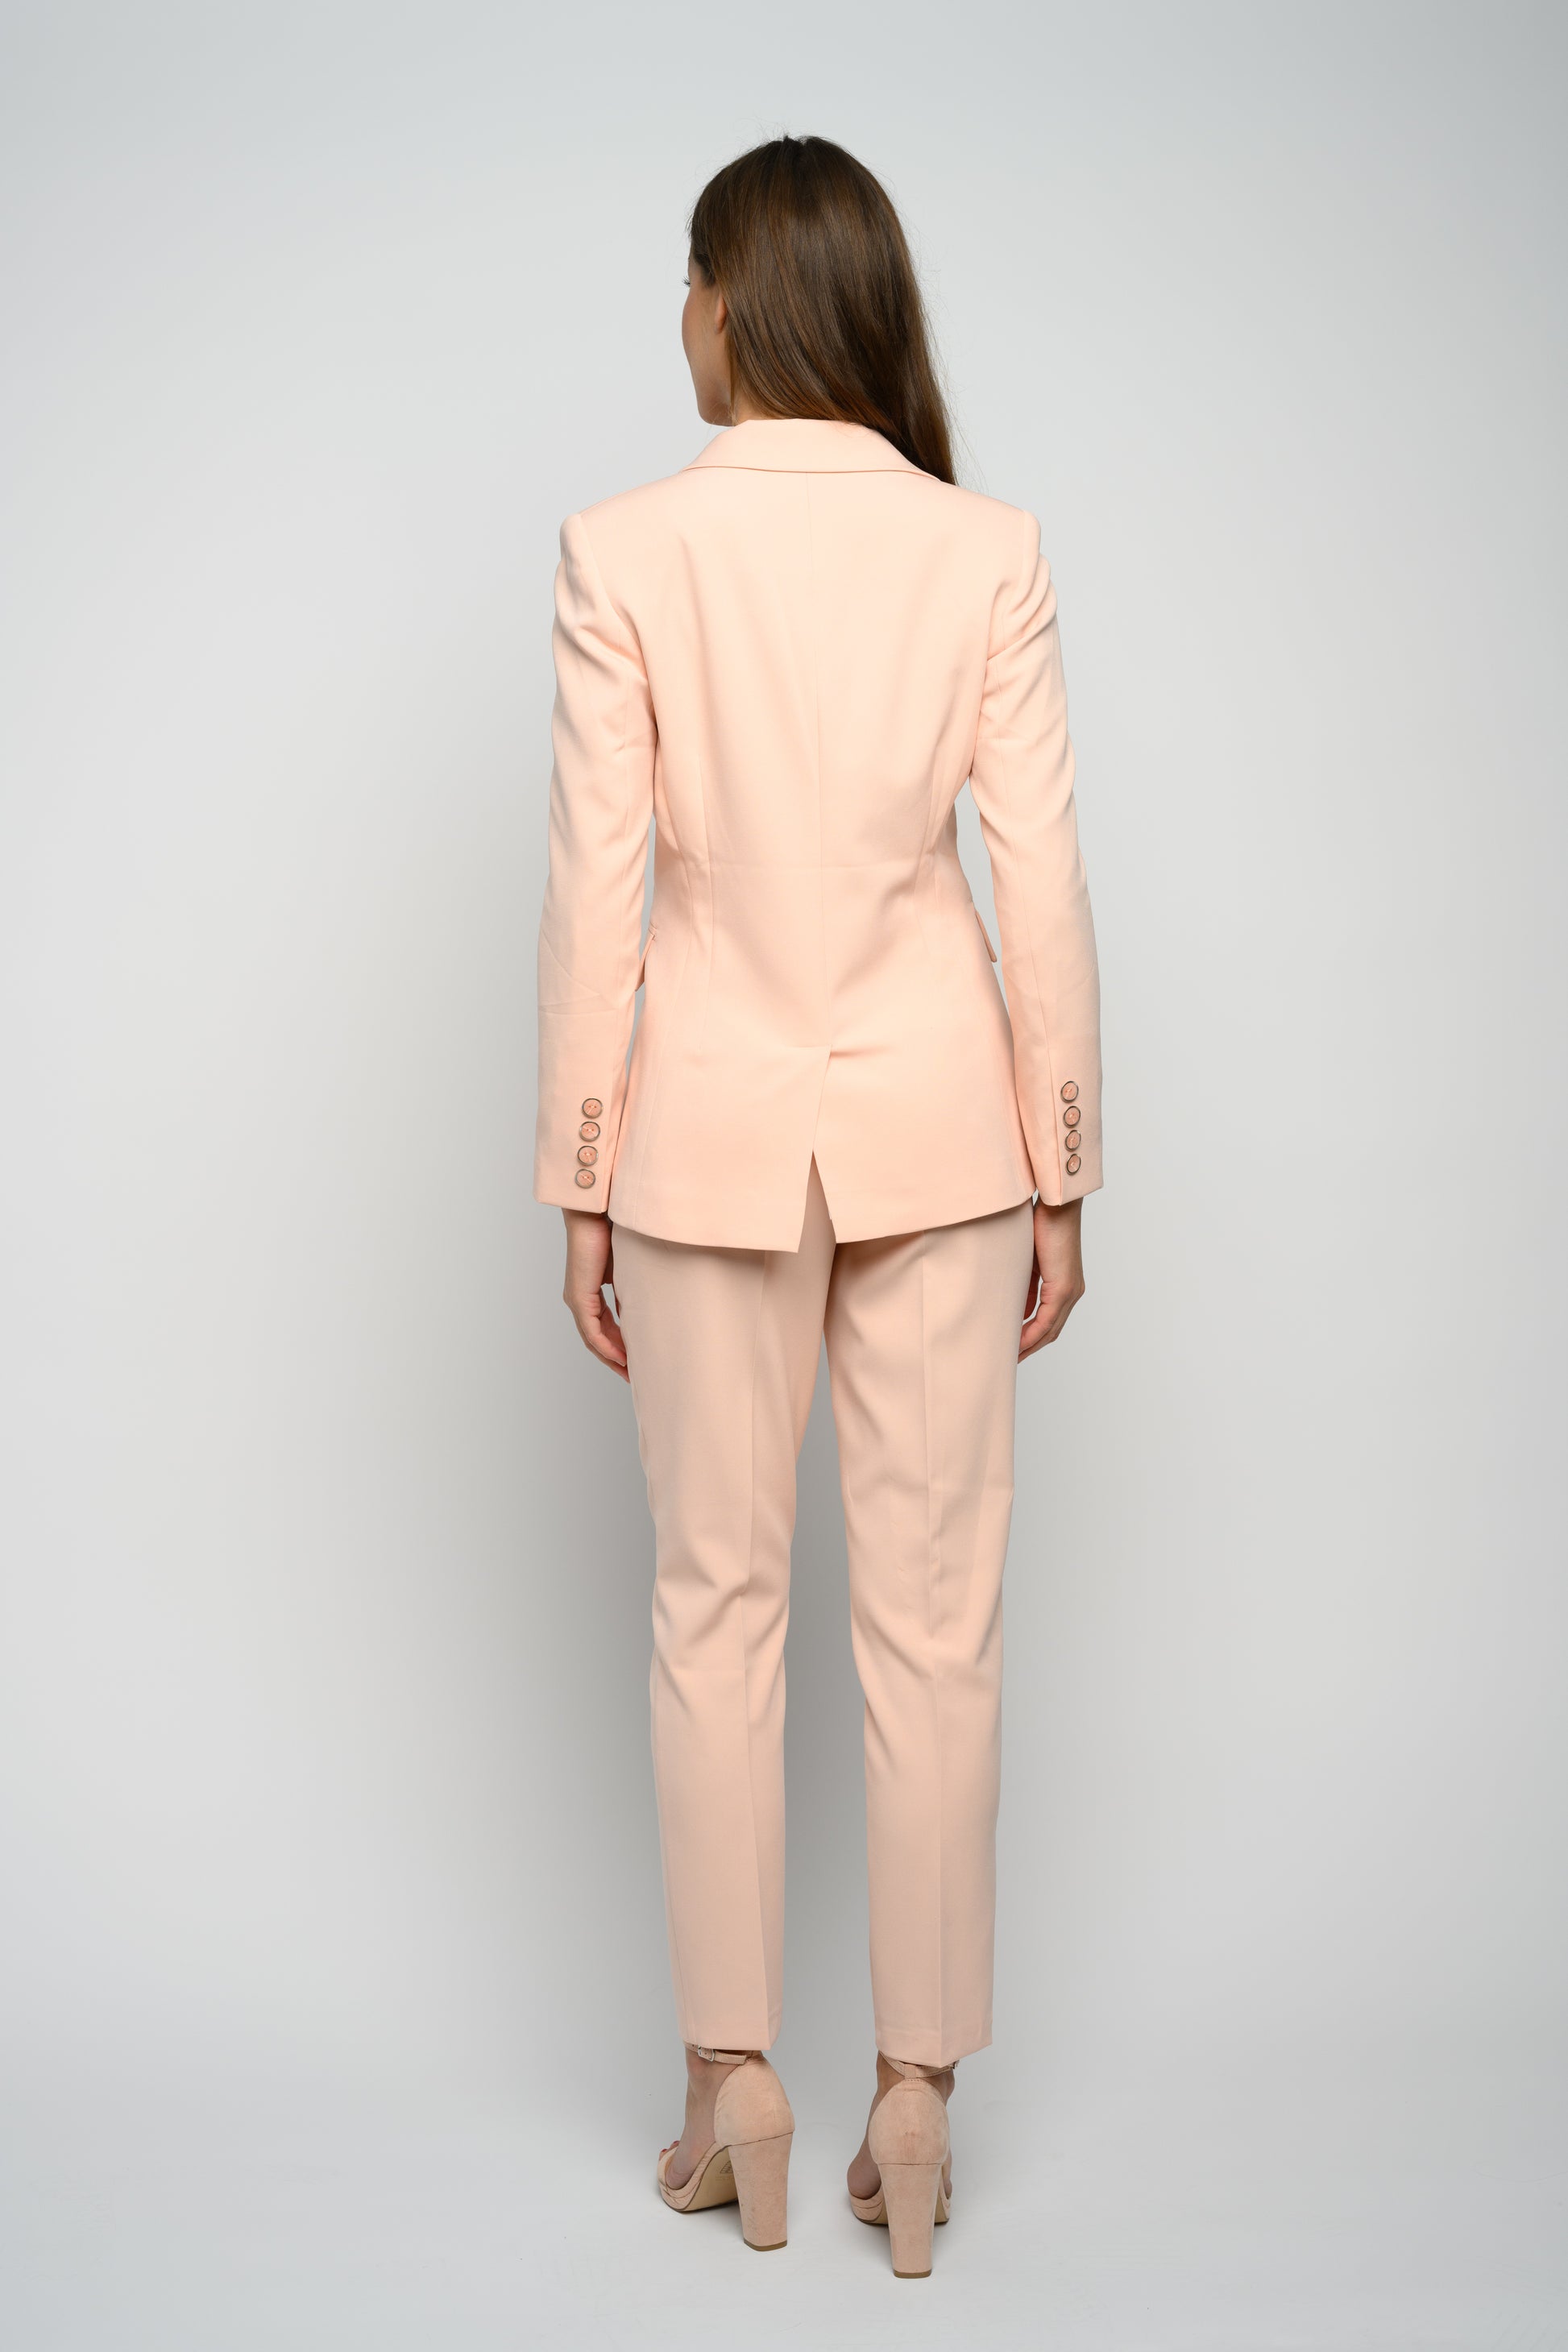 OMC 2-Pieces Women's Blush Pink Luxe Suit – OMC Formal